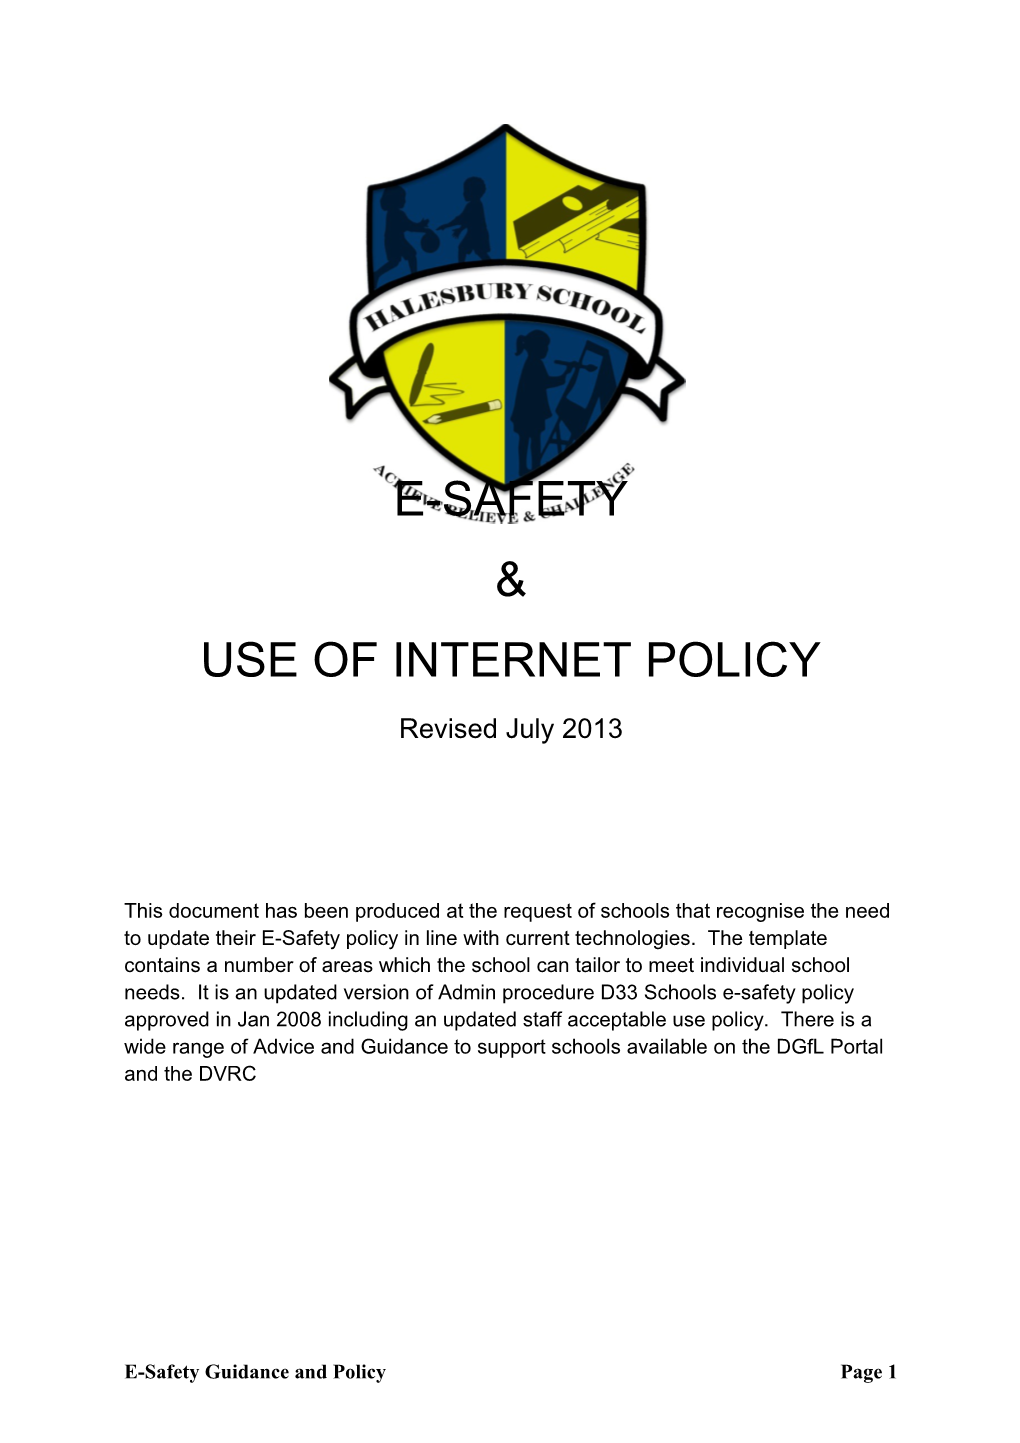 Use of Internet Policy